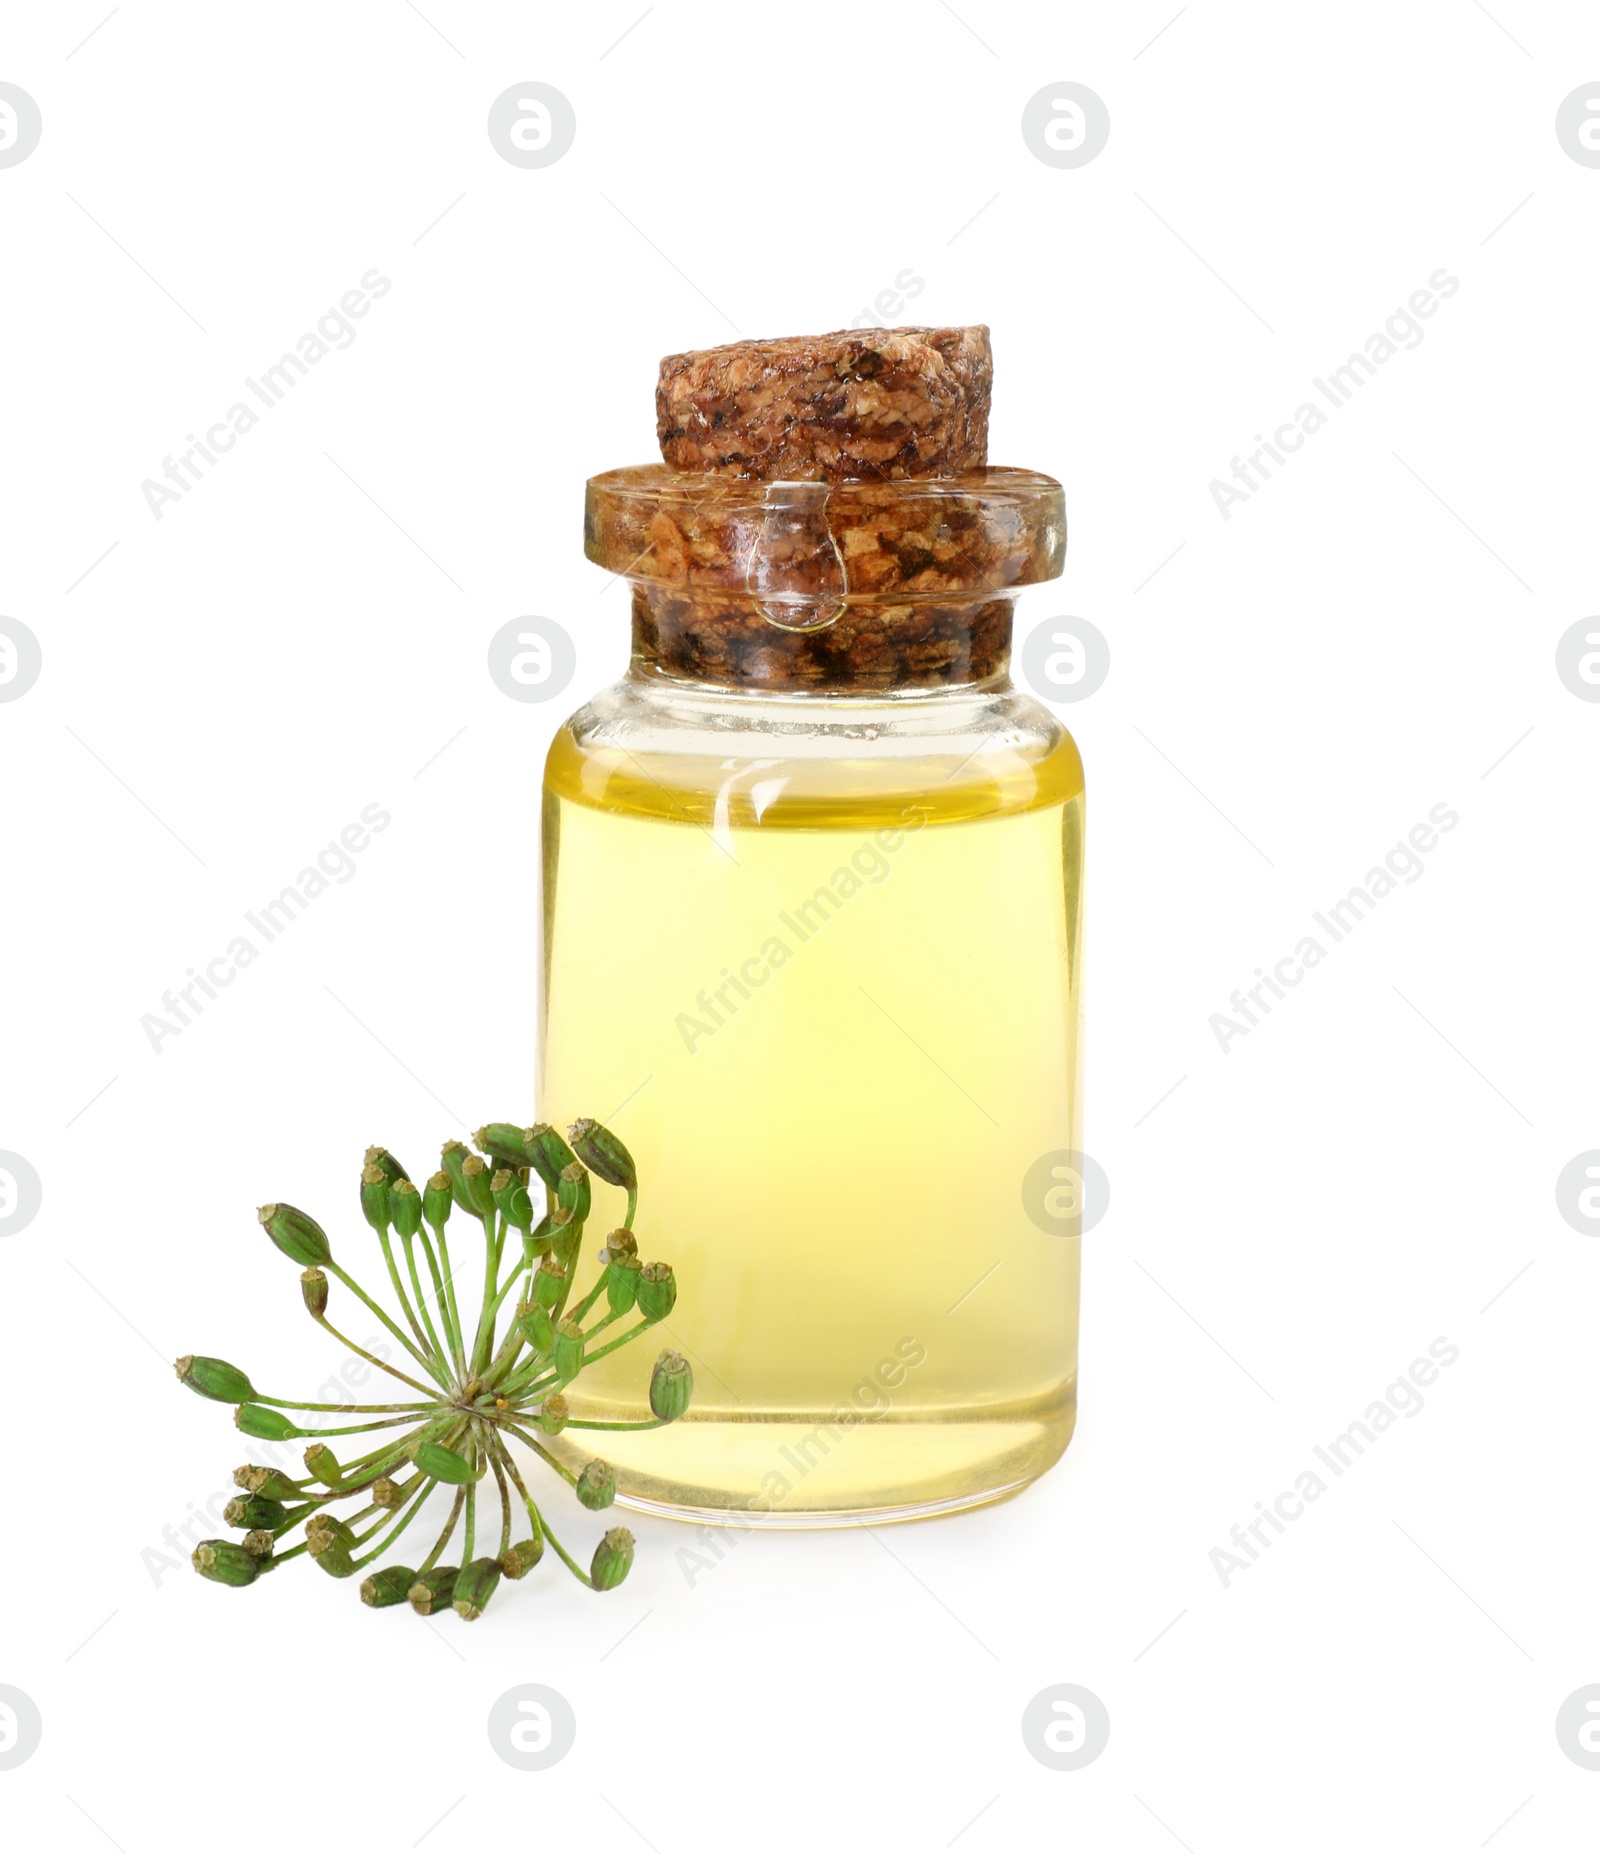 Photo of Bottle of essential oil and fresh dill isolated on white